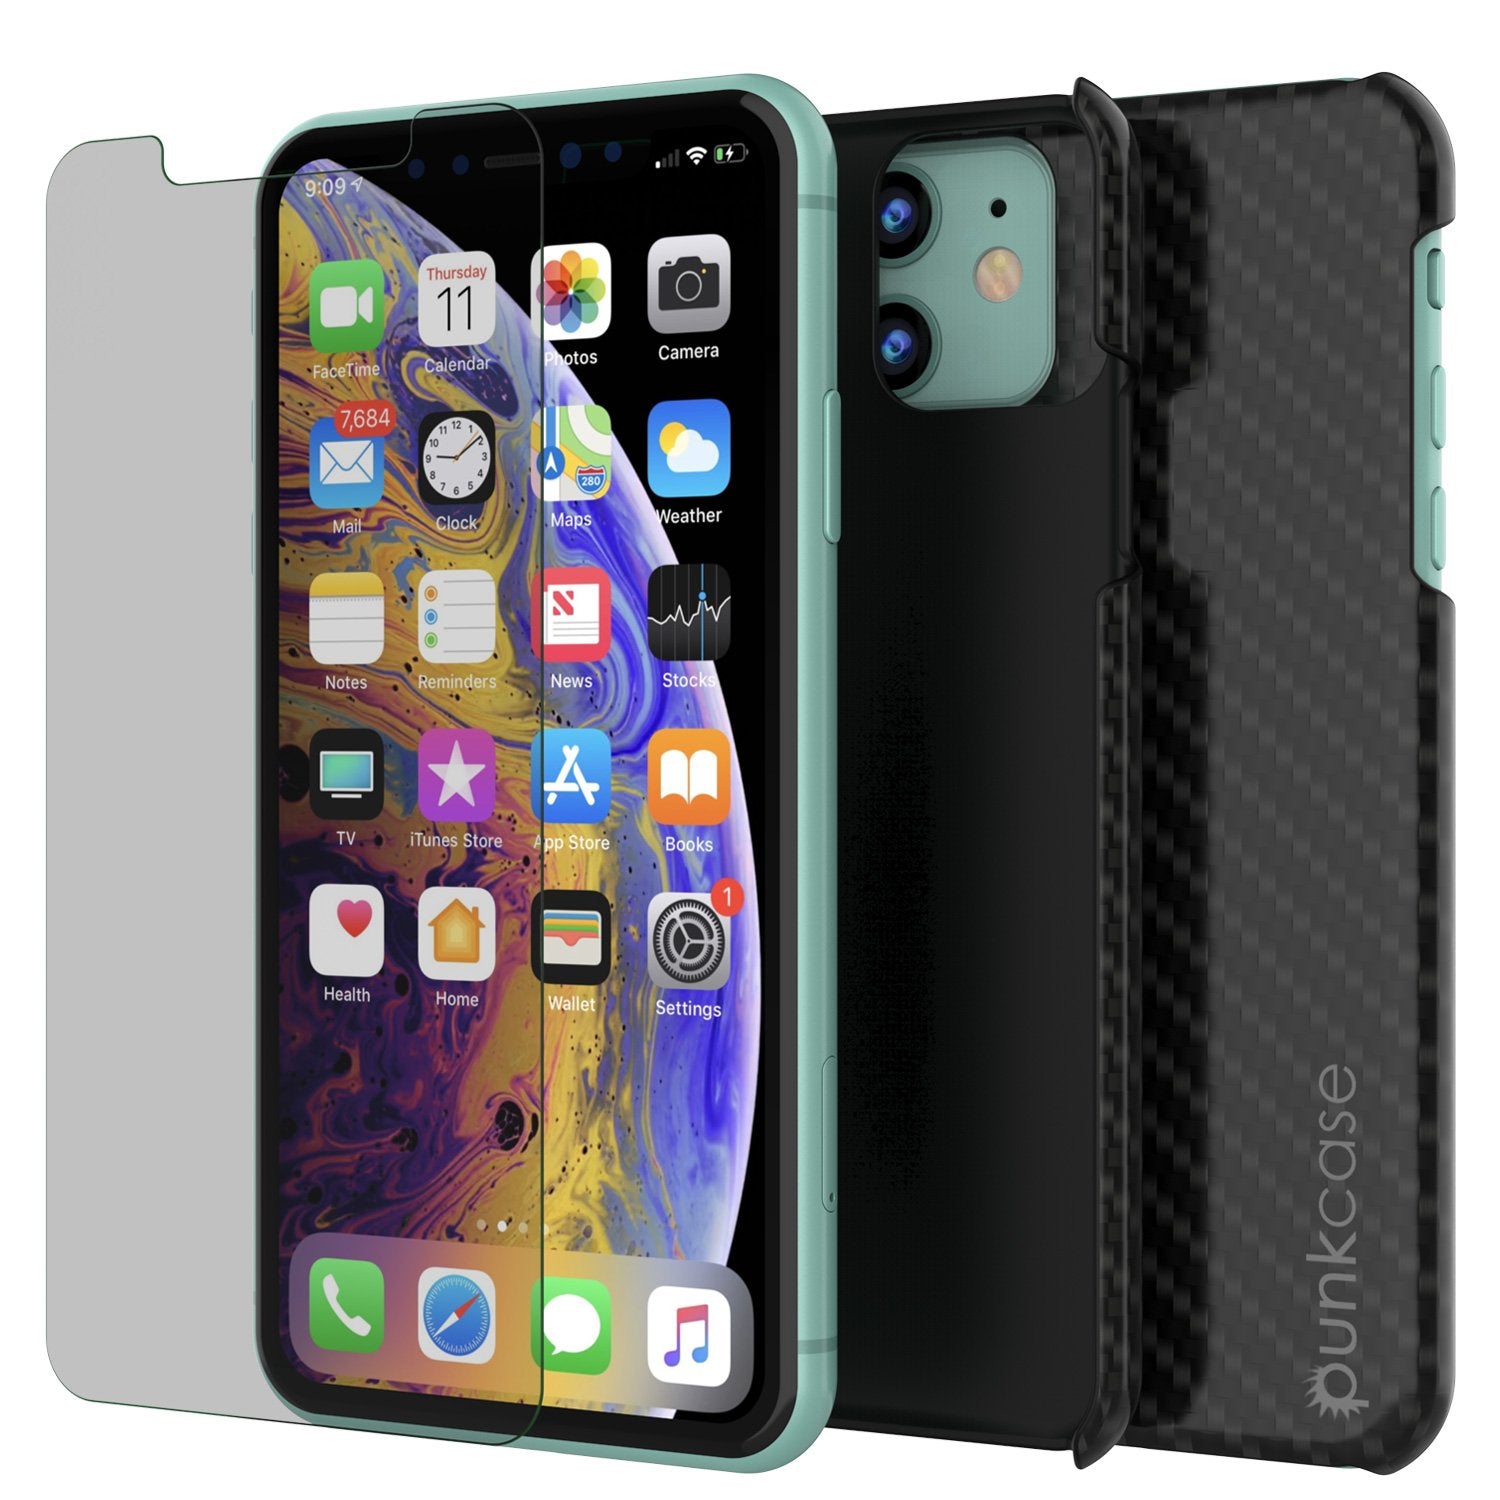 iPhone 11 Case, Punkcase CarbonShield, Heavy Duty & Ultra Thin 2 Piece Dual Layer [shockproof]